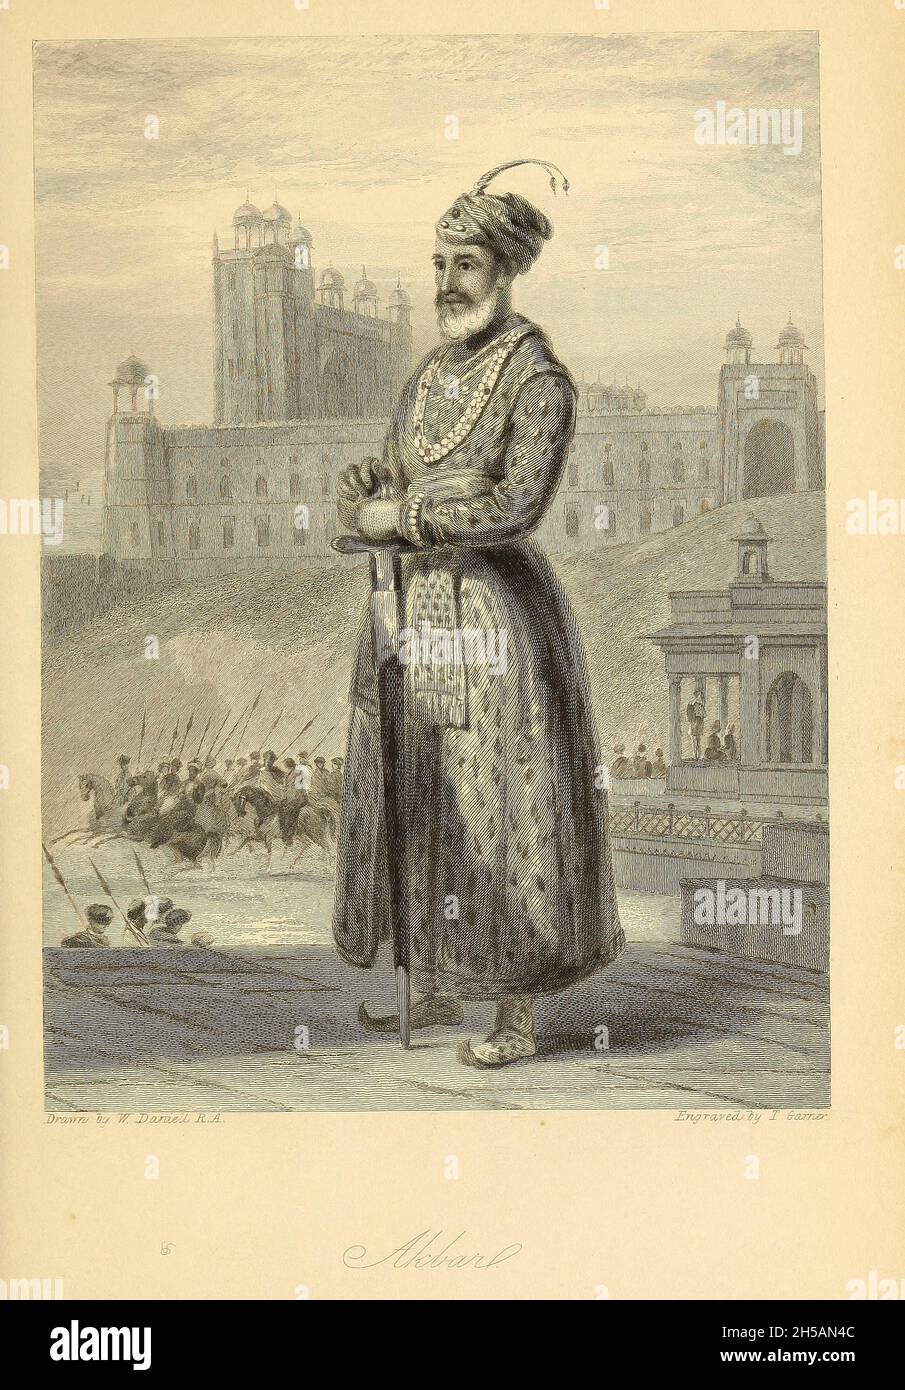 Abu'l-Fath Jalal-ud-din Muhammad Akbar (25 October 1542– 27 October 1605), popularly known as Akbar the Great (Akbar-i-azam), and also as Akbar I was the third Mughal emperor, who reigned from 1556 to 1605. Akbar succeeded his father, Humayun, under a regent, Bairam Khan, who helped the young emperor expand and consolidate Mughal domains in India. From the book ' The Oriental annual, or, Scenes in India ' by the Rev. Hobart Caunter Published by Edward Bull, London 1838 engravings from drawings by William Daniell Stock Photo